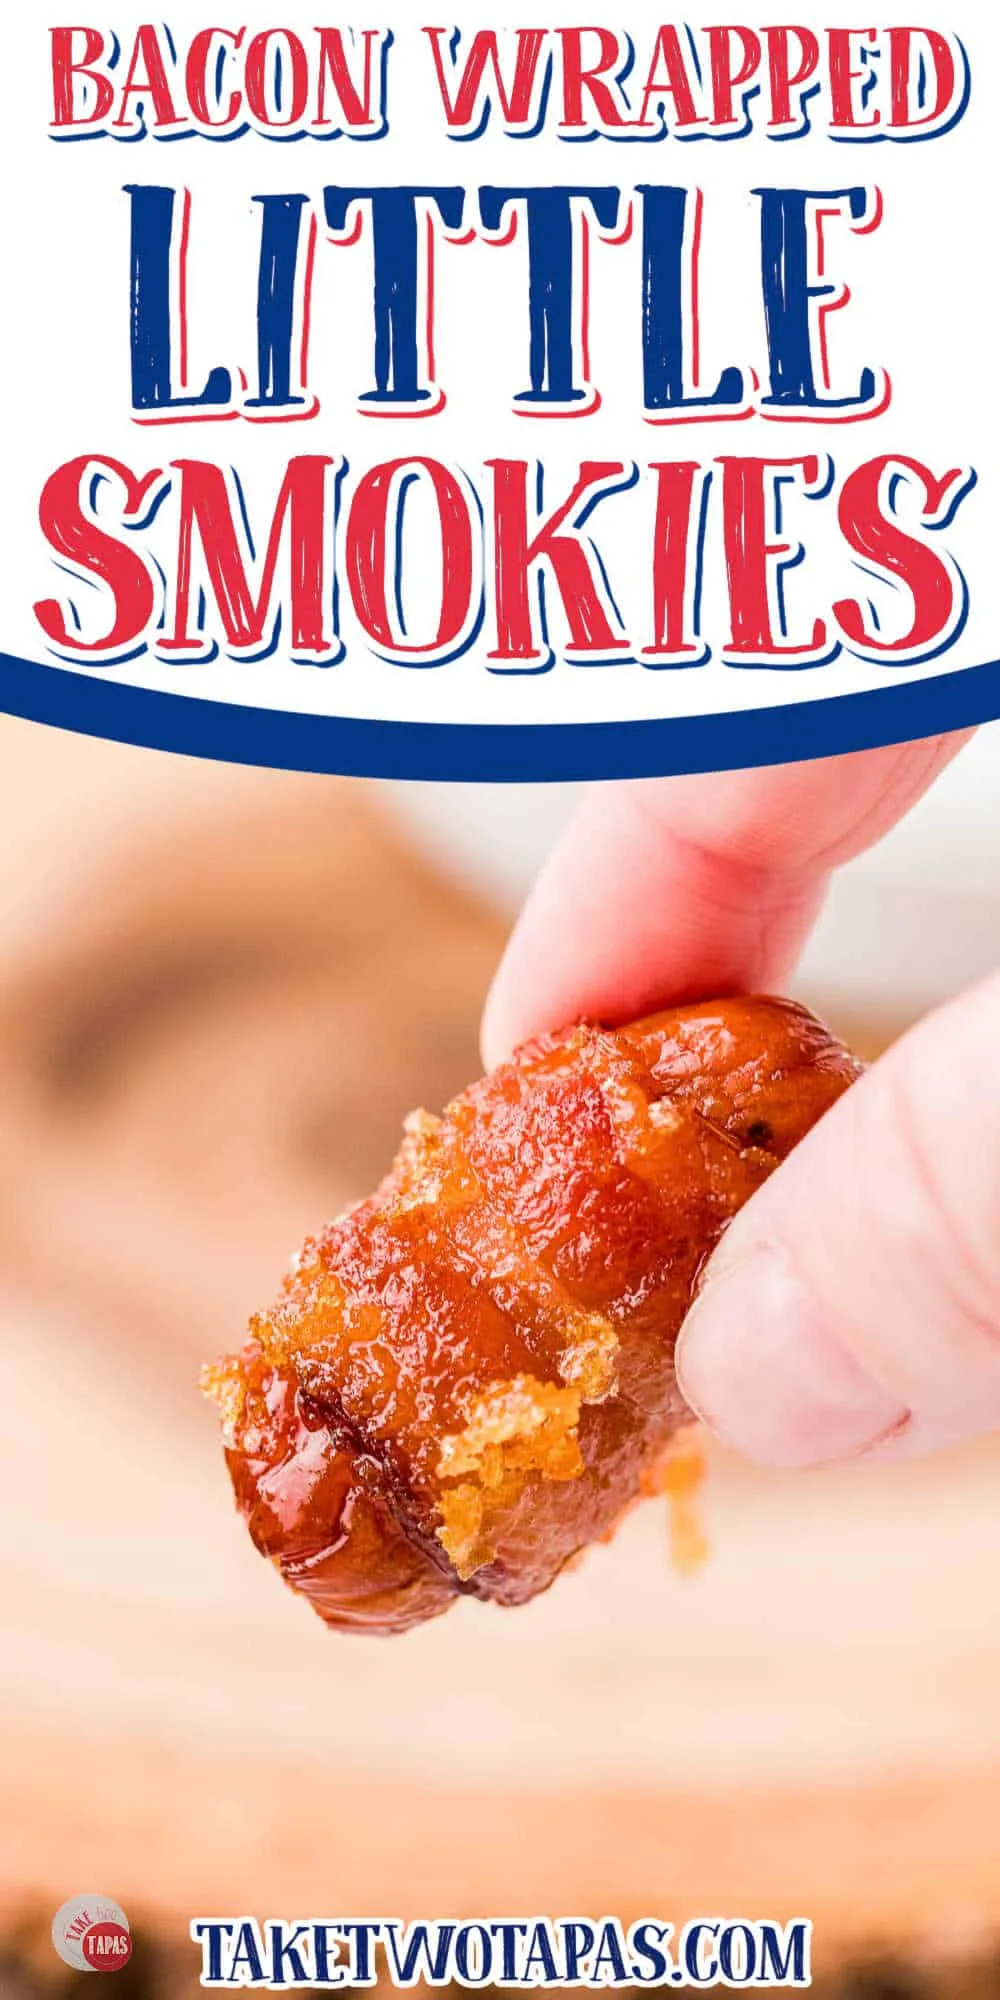 hand holding bacon wrapped smokies with white banner and text